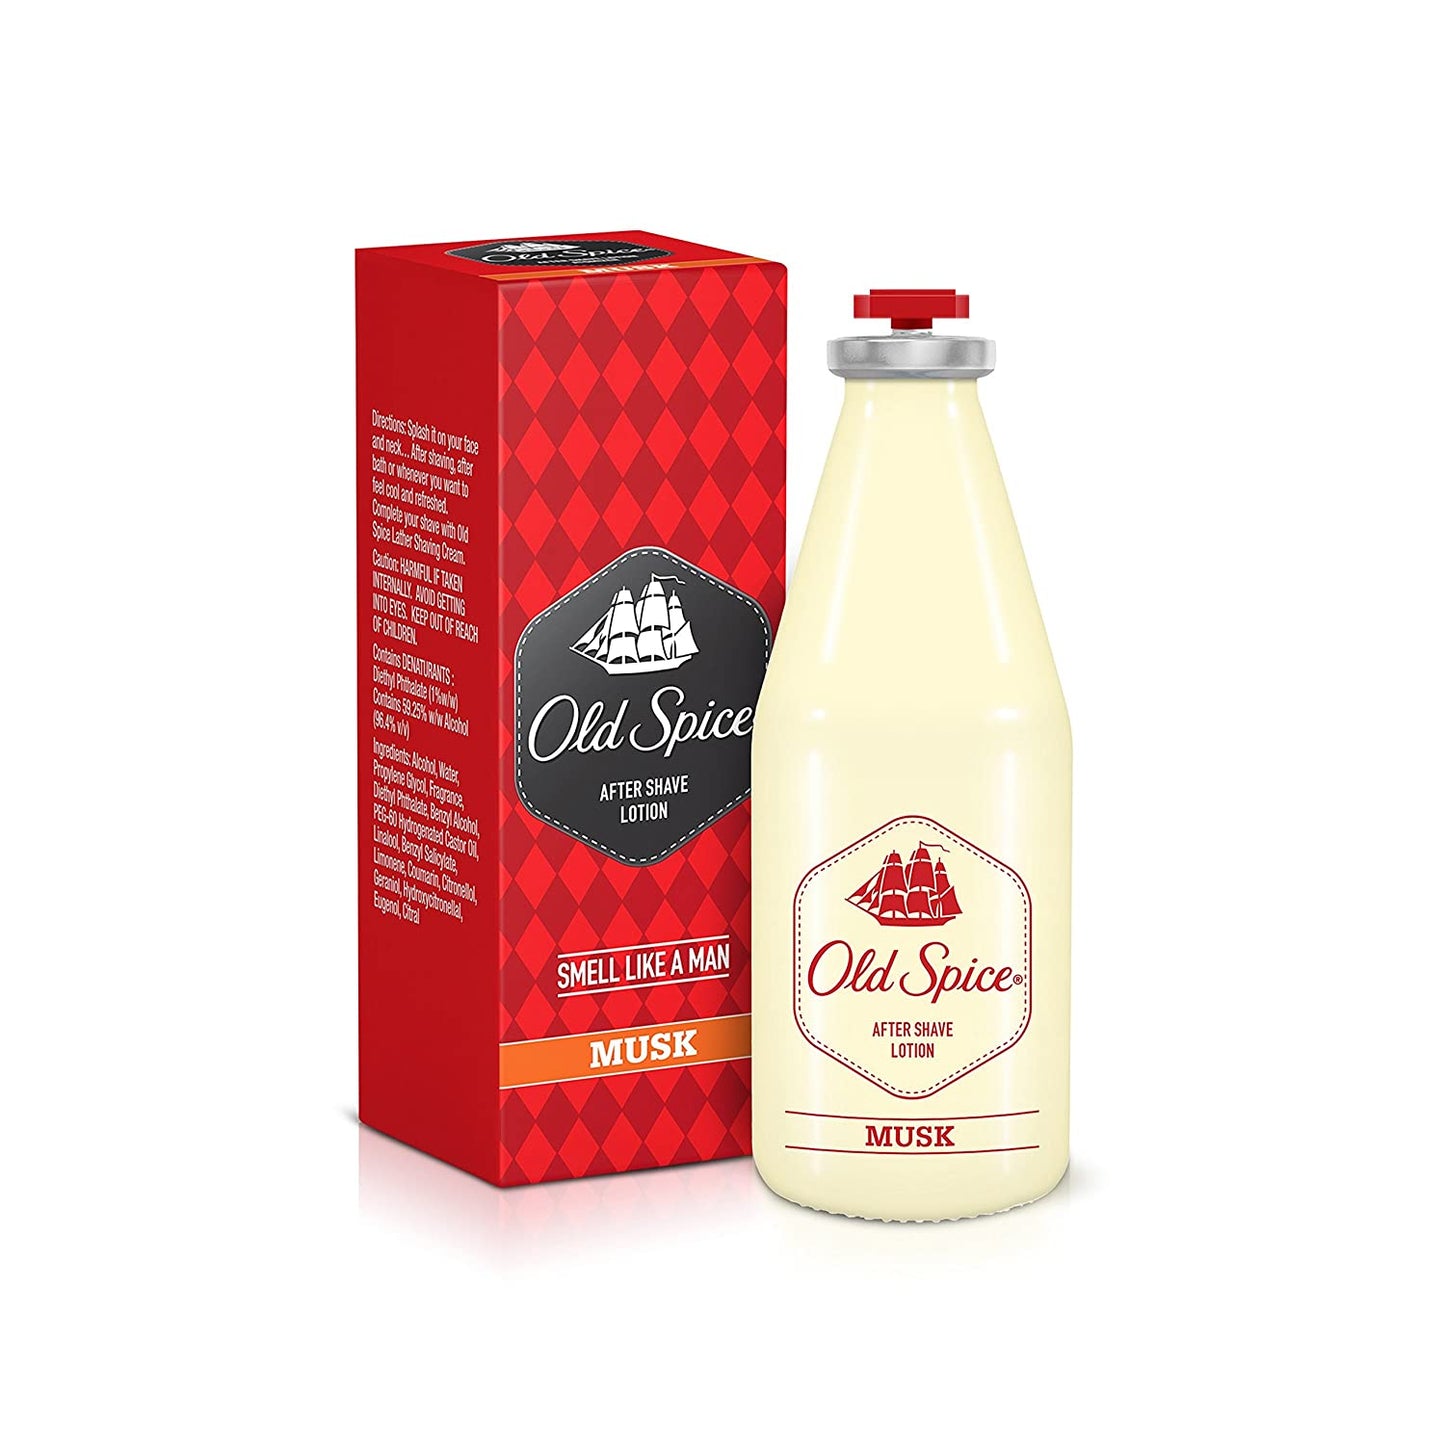 Old Spice After Shave - Musk, 50ml